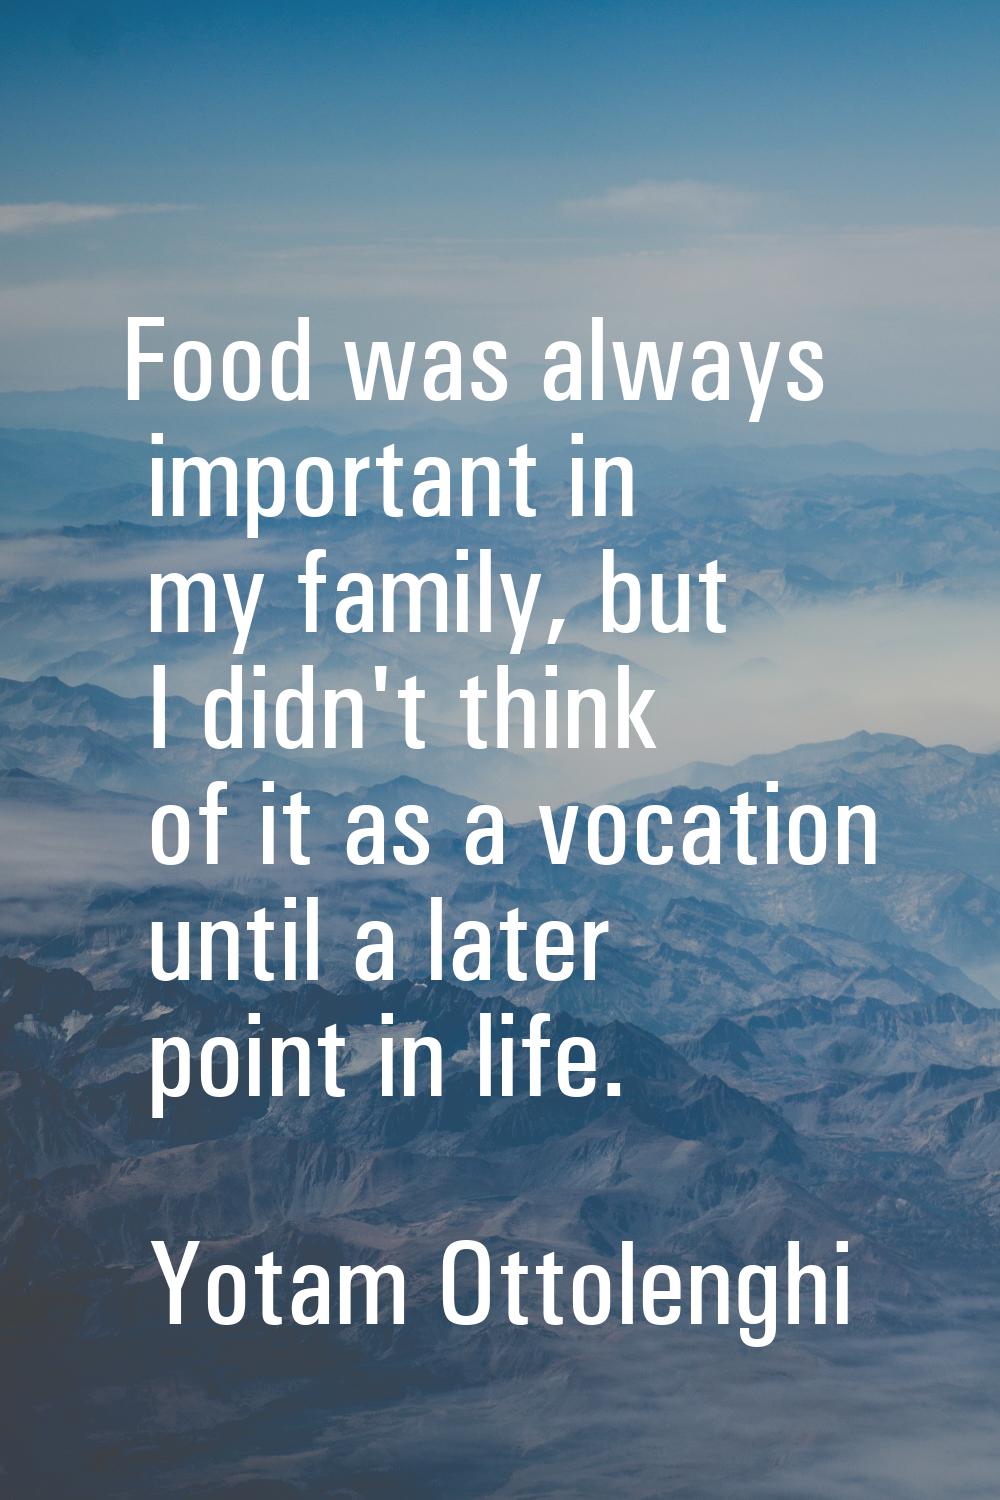 Food was always important in my family, but I didn't think of it as a vocation until a later point 